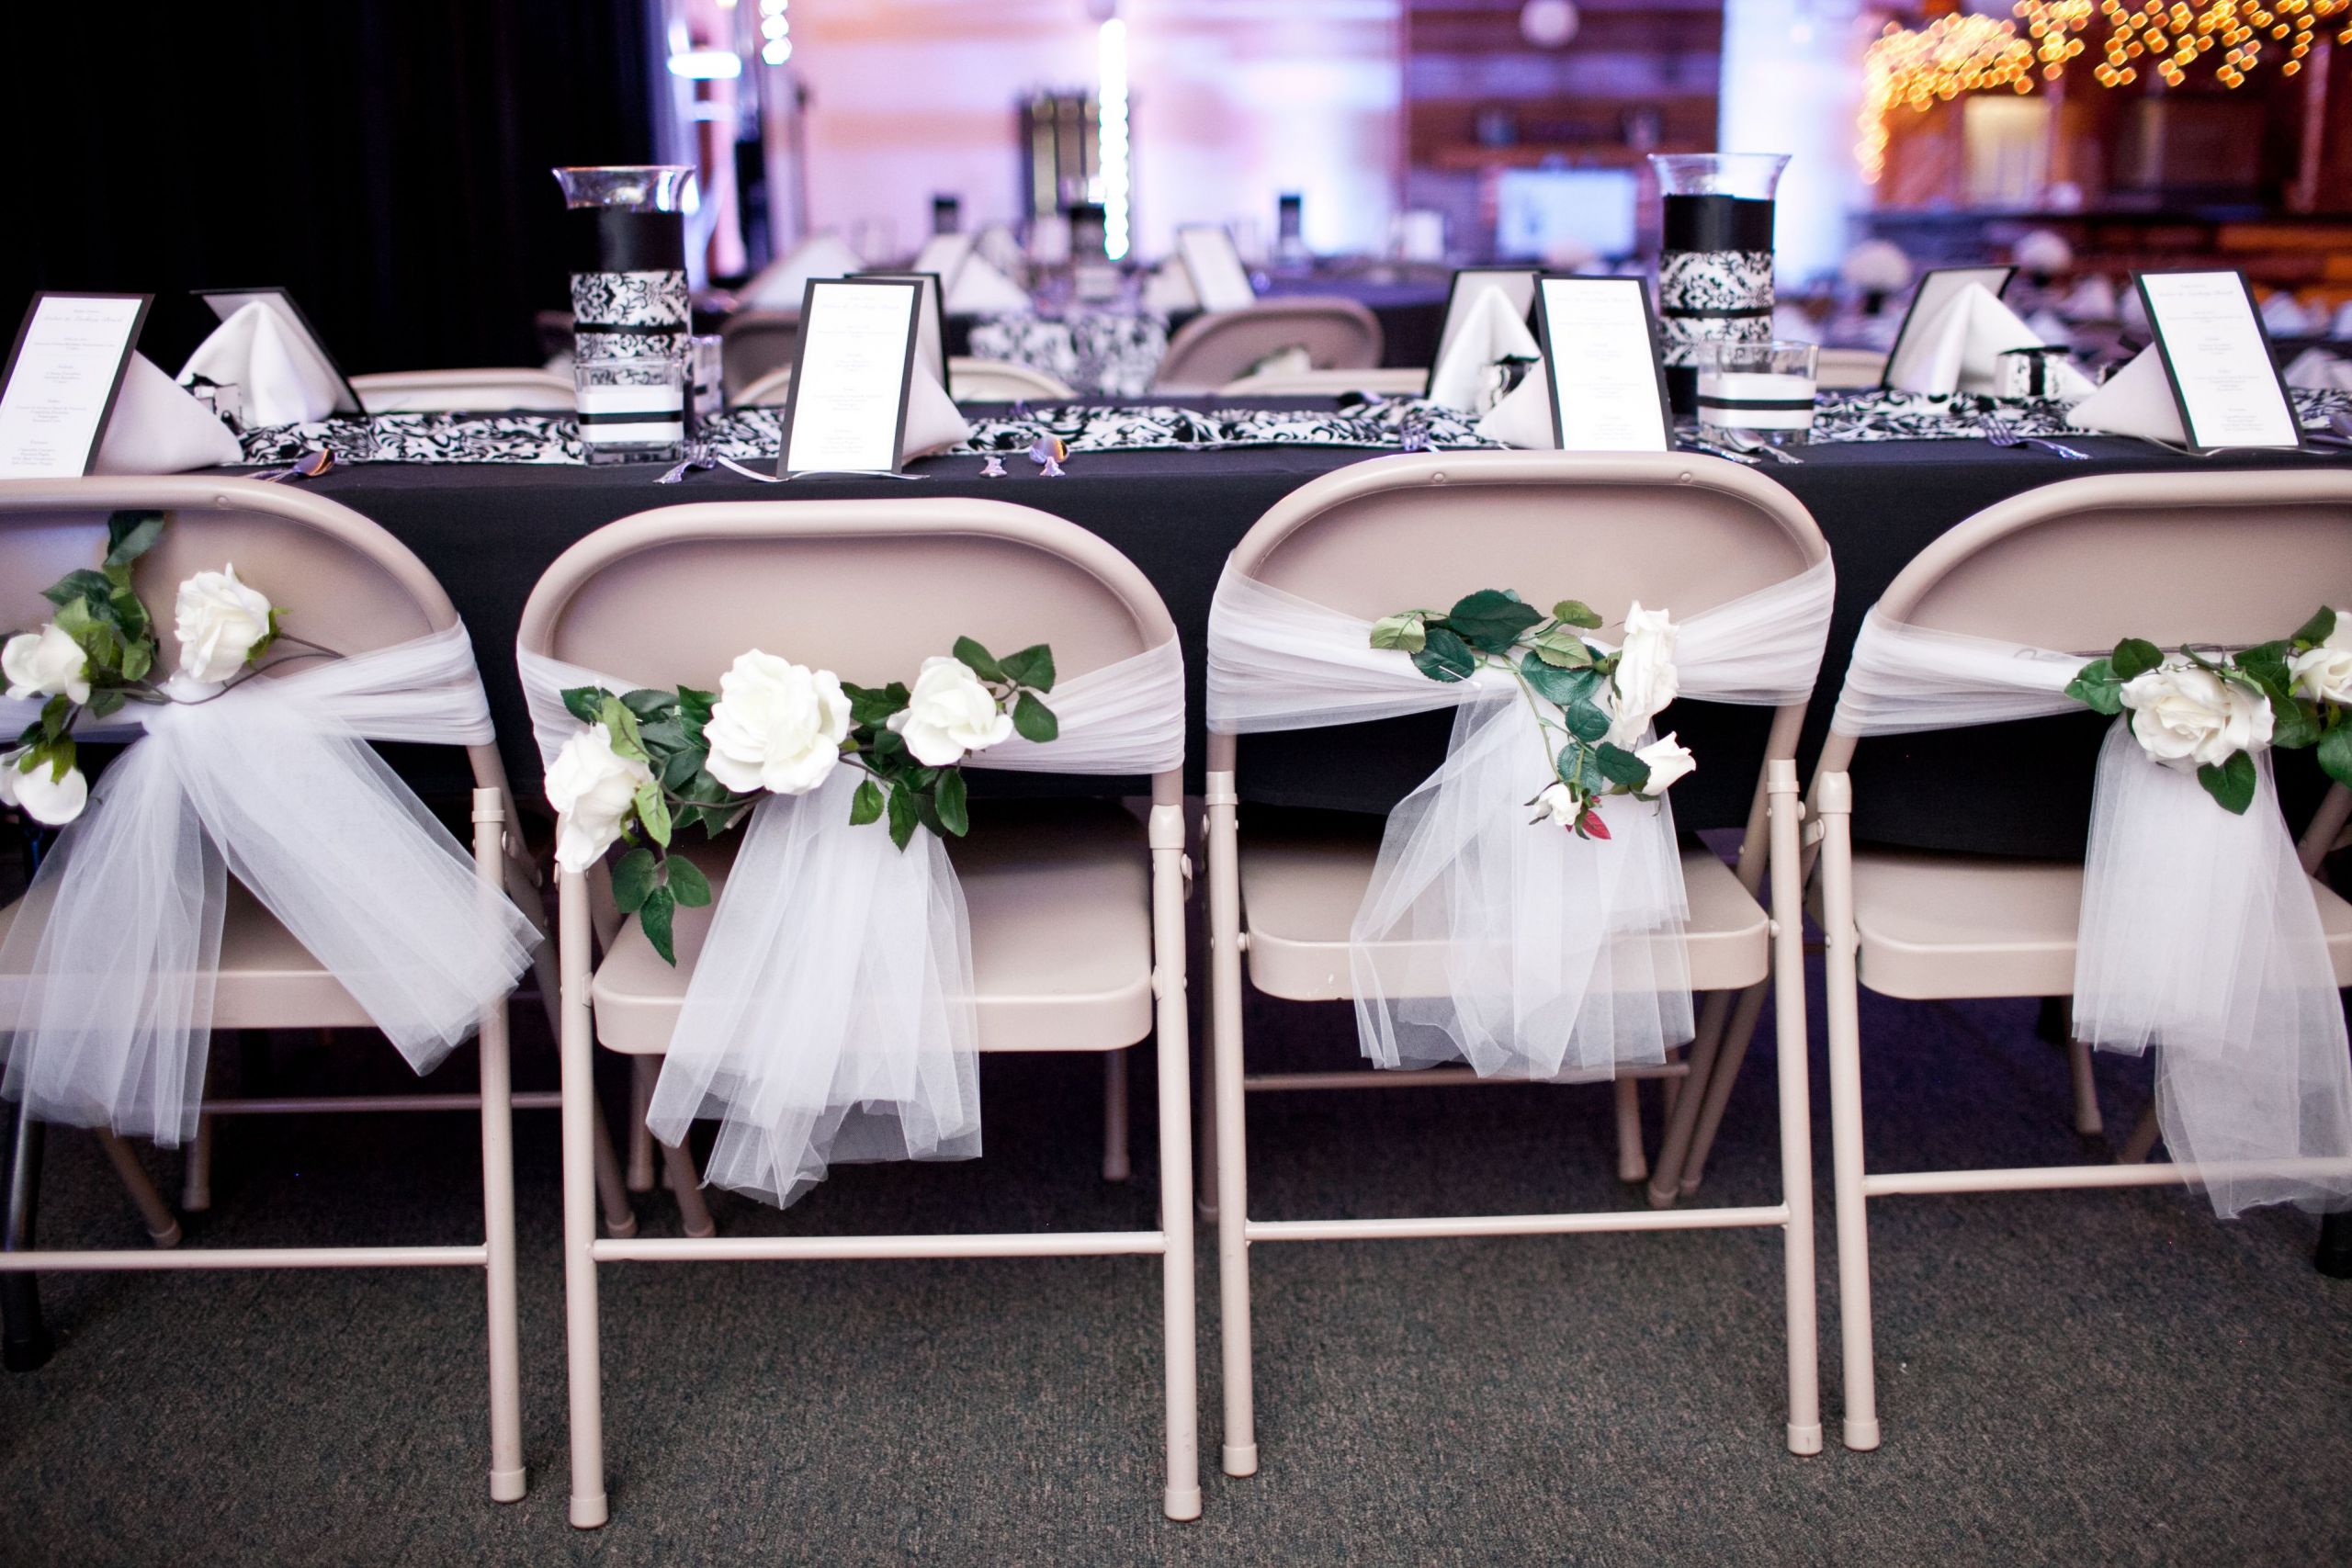 DIY Chair Covers Wedding
 Do It Yourself Wedding Chair Decorations